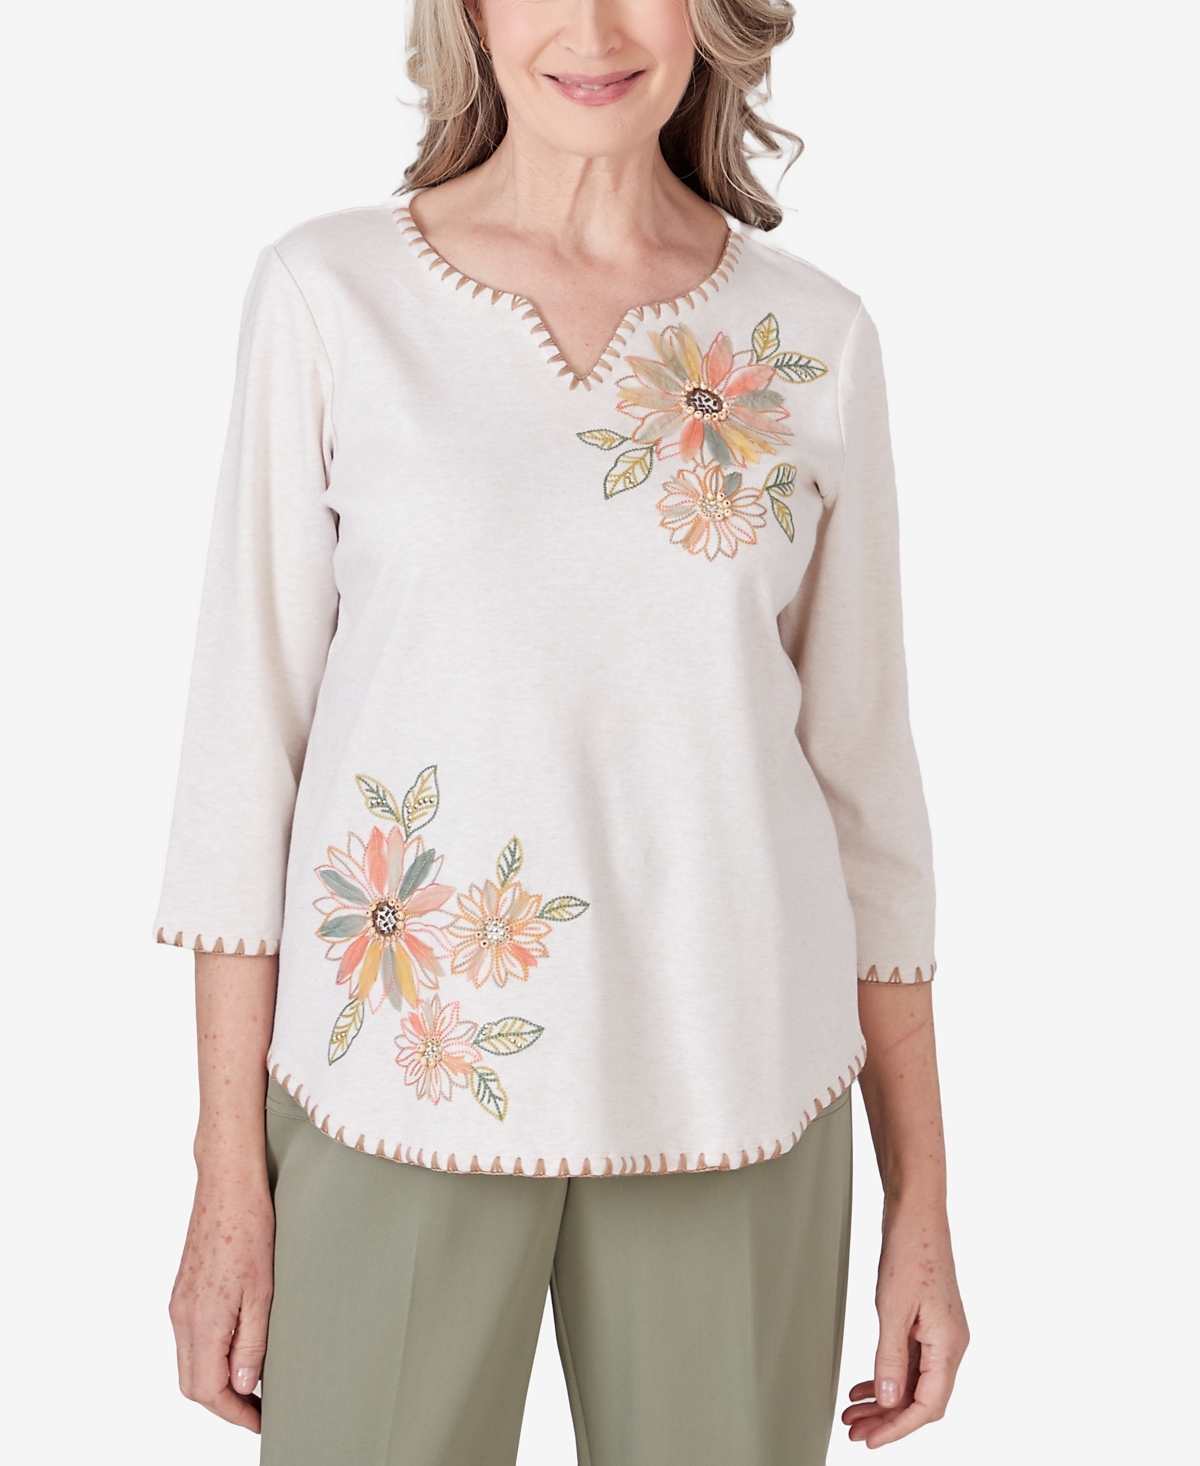 Women's Tuscan Sunset Embroidered Flower Round Neck Top - Oatmeal